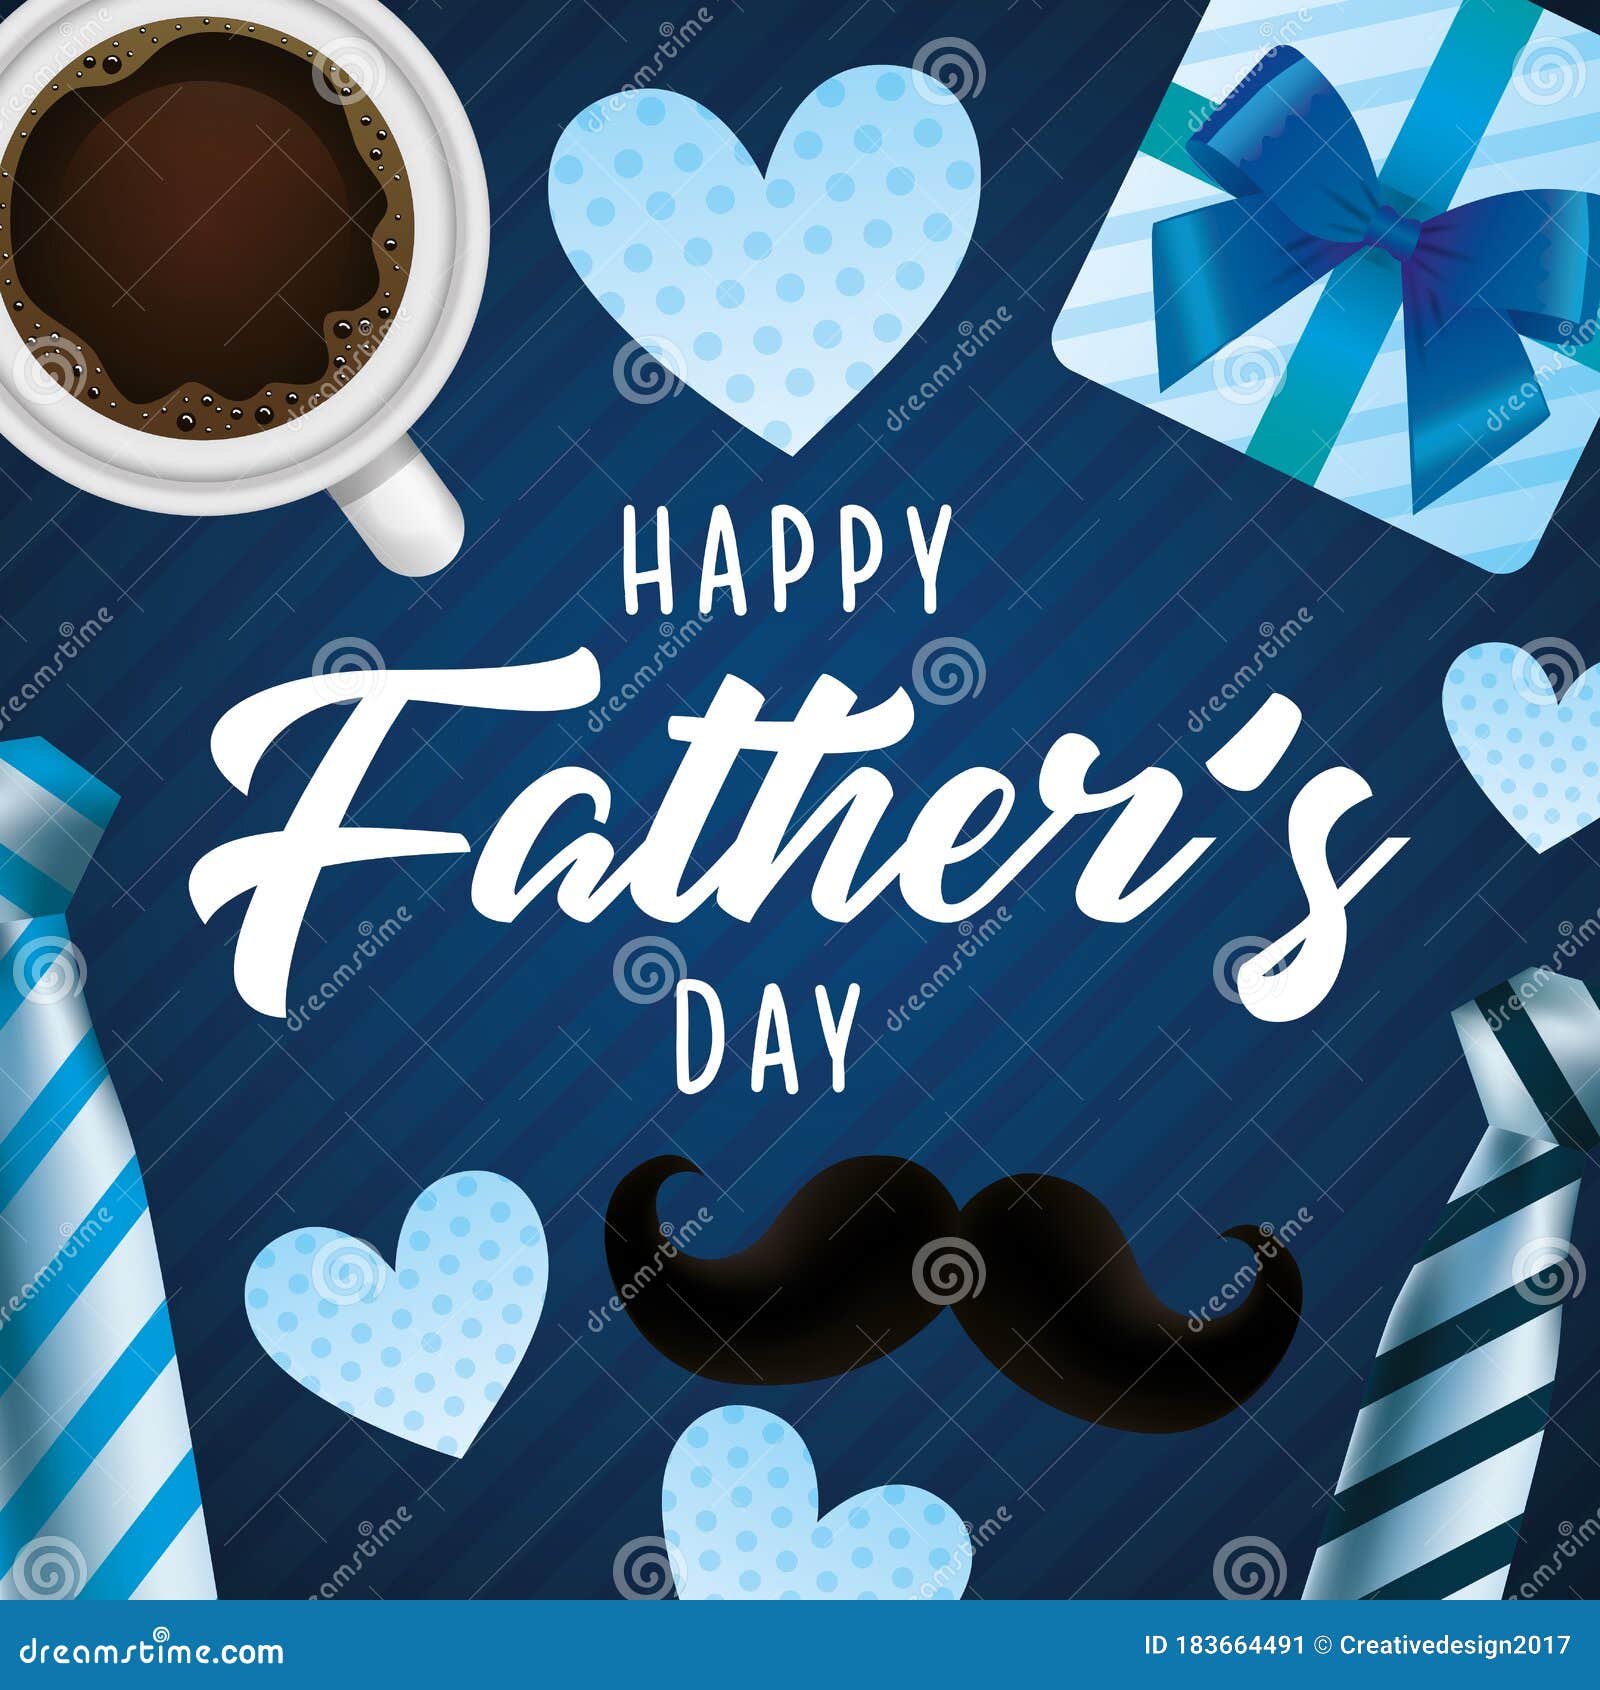 Happy fathers day wallpaper Vector Image  1566896  StockUnlimited